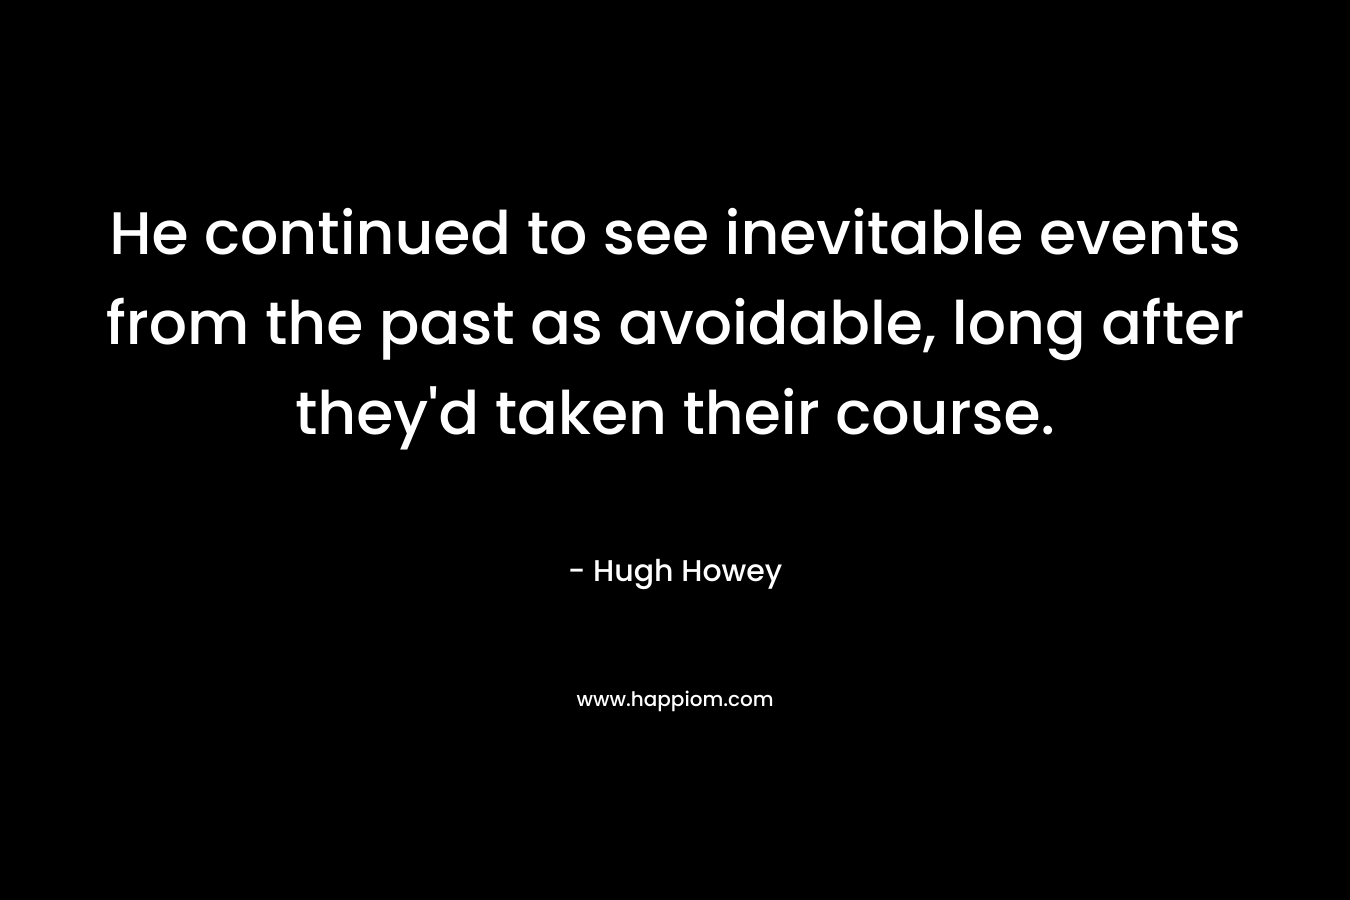 He continued to see inevitable events from the past as avoidable, long after they’d taken their course. – Hugh Howey